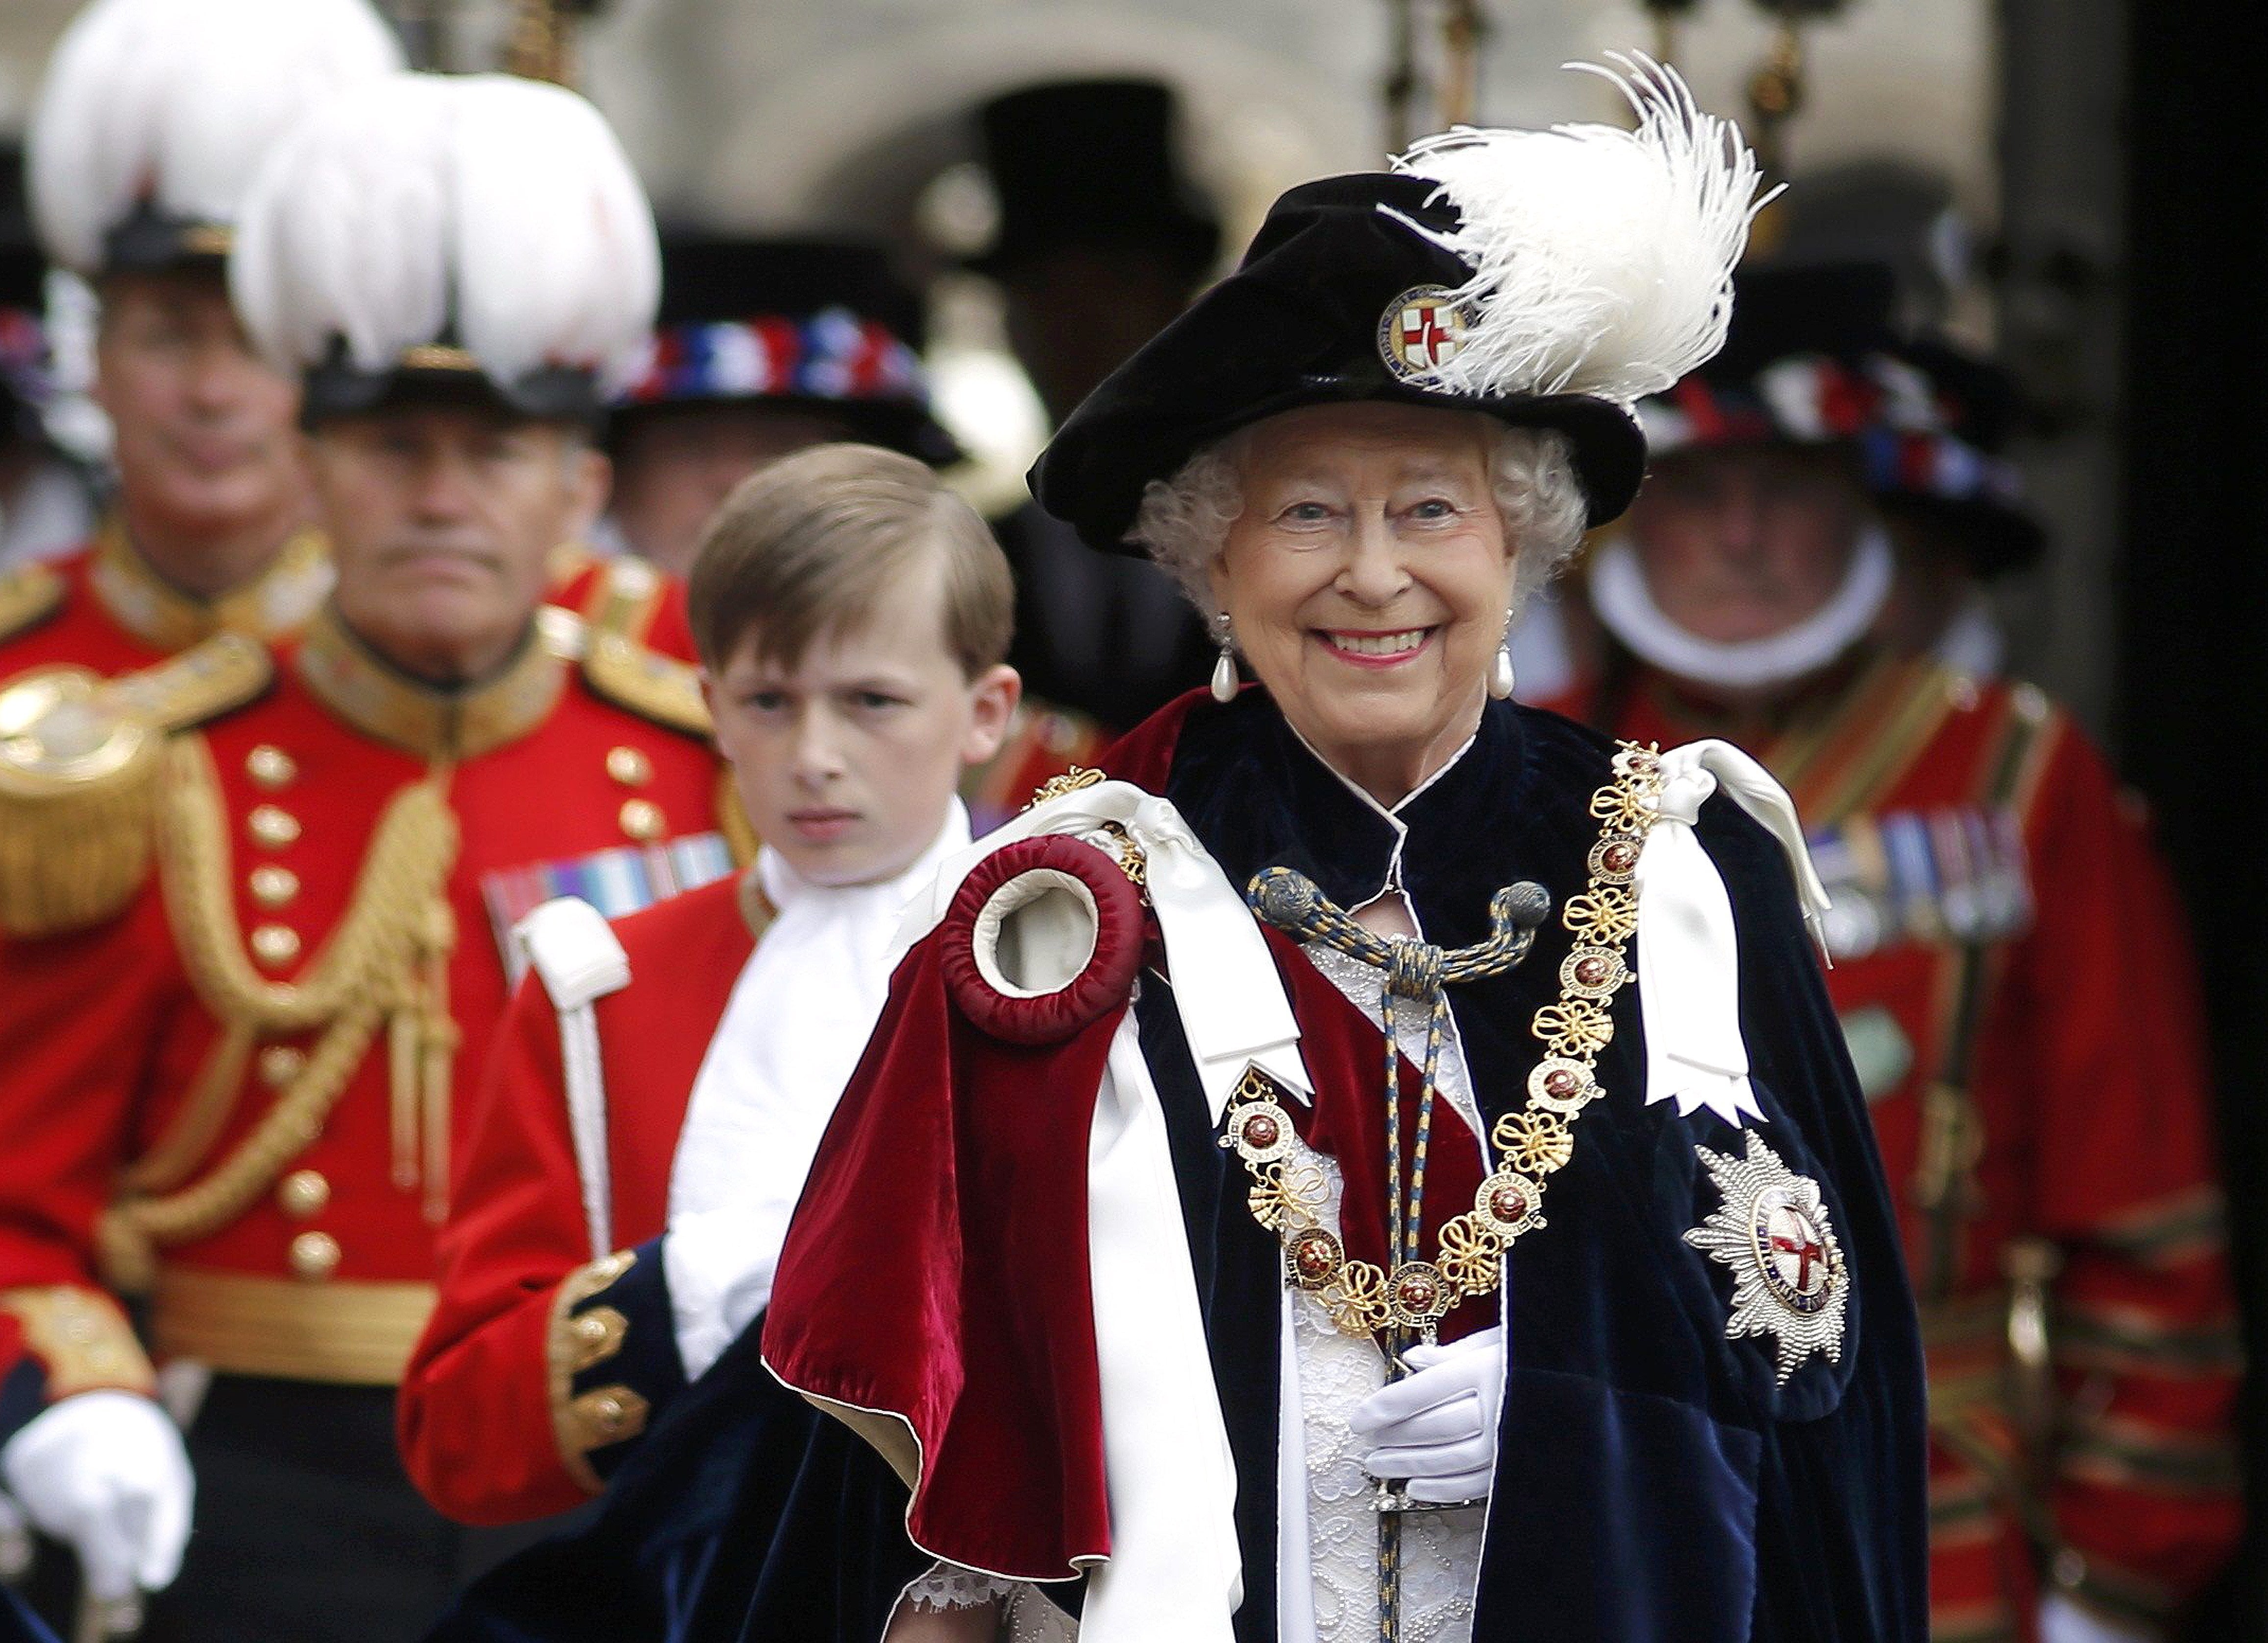 The Queen at the Order of the Garter ceremony in June 2015